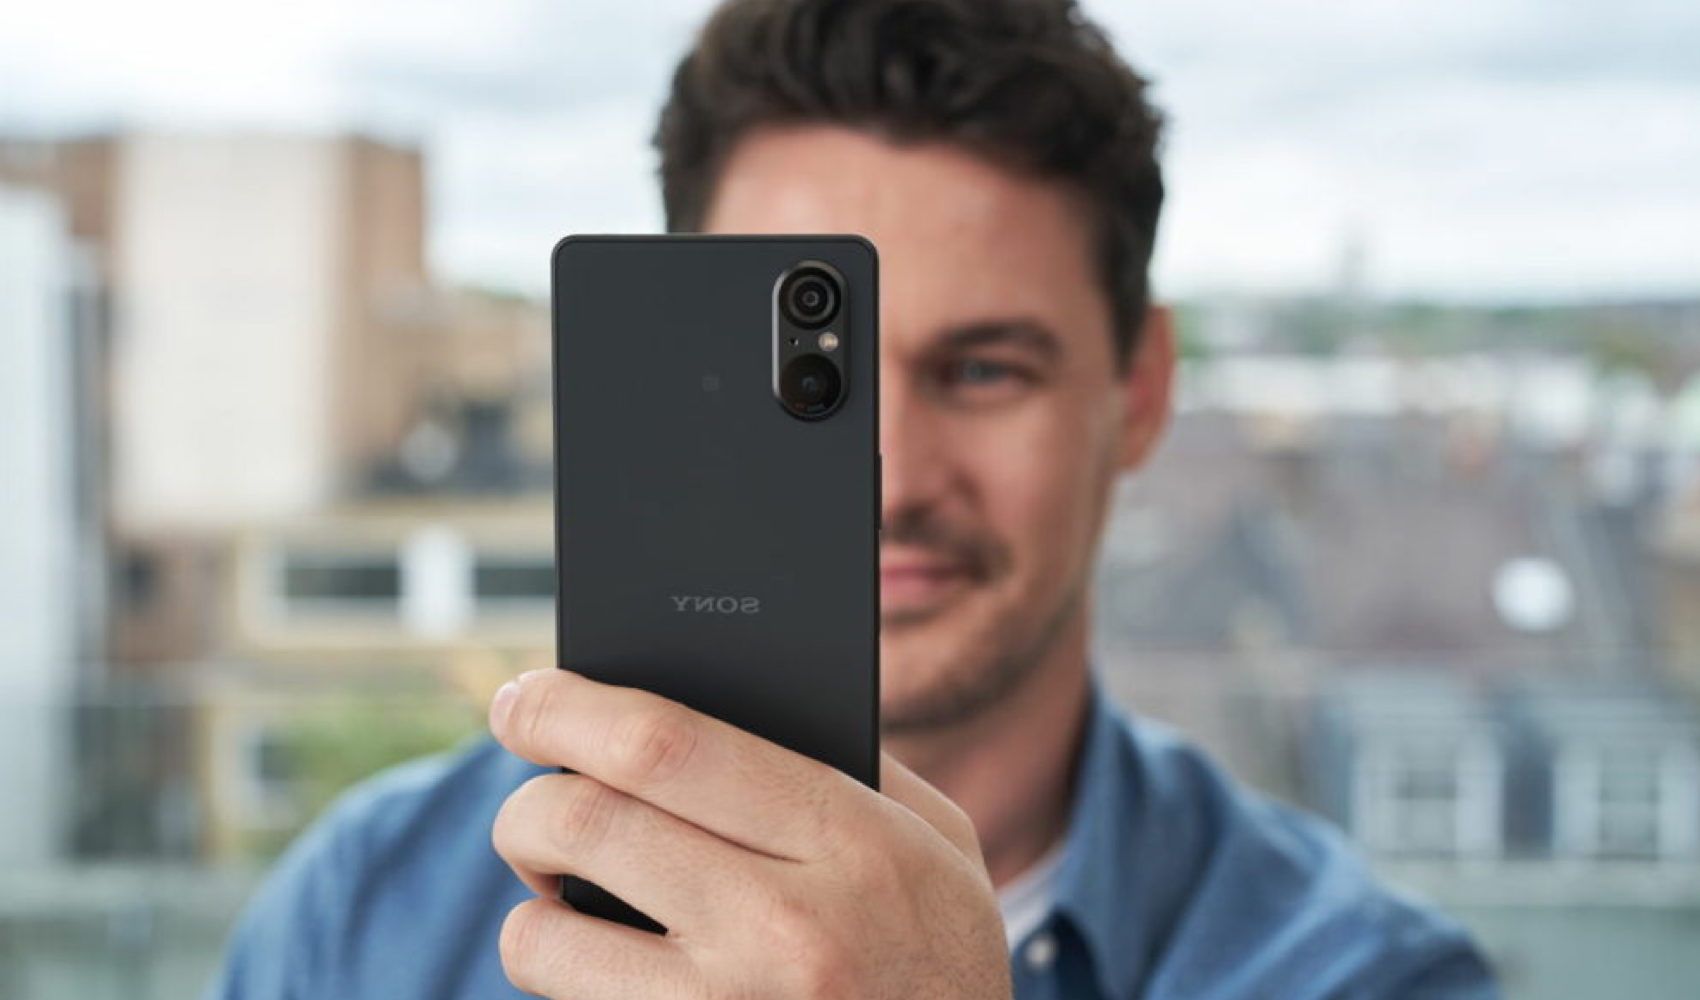 Sony Xperia 5 V: designed for photo, video and vlogging by Jose